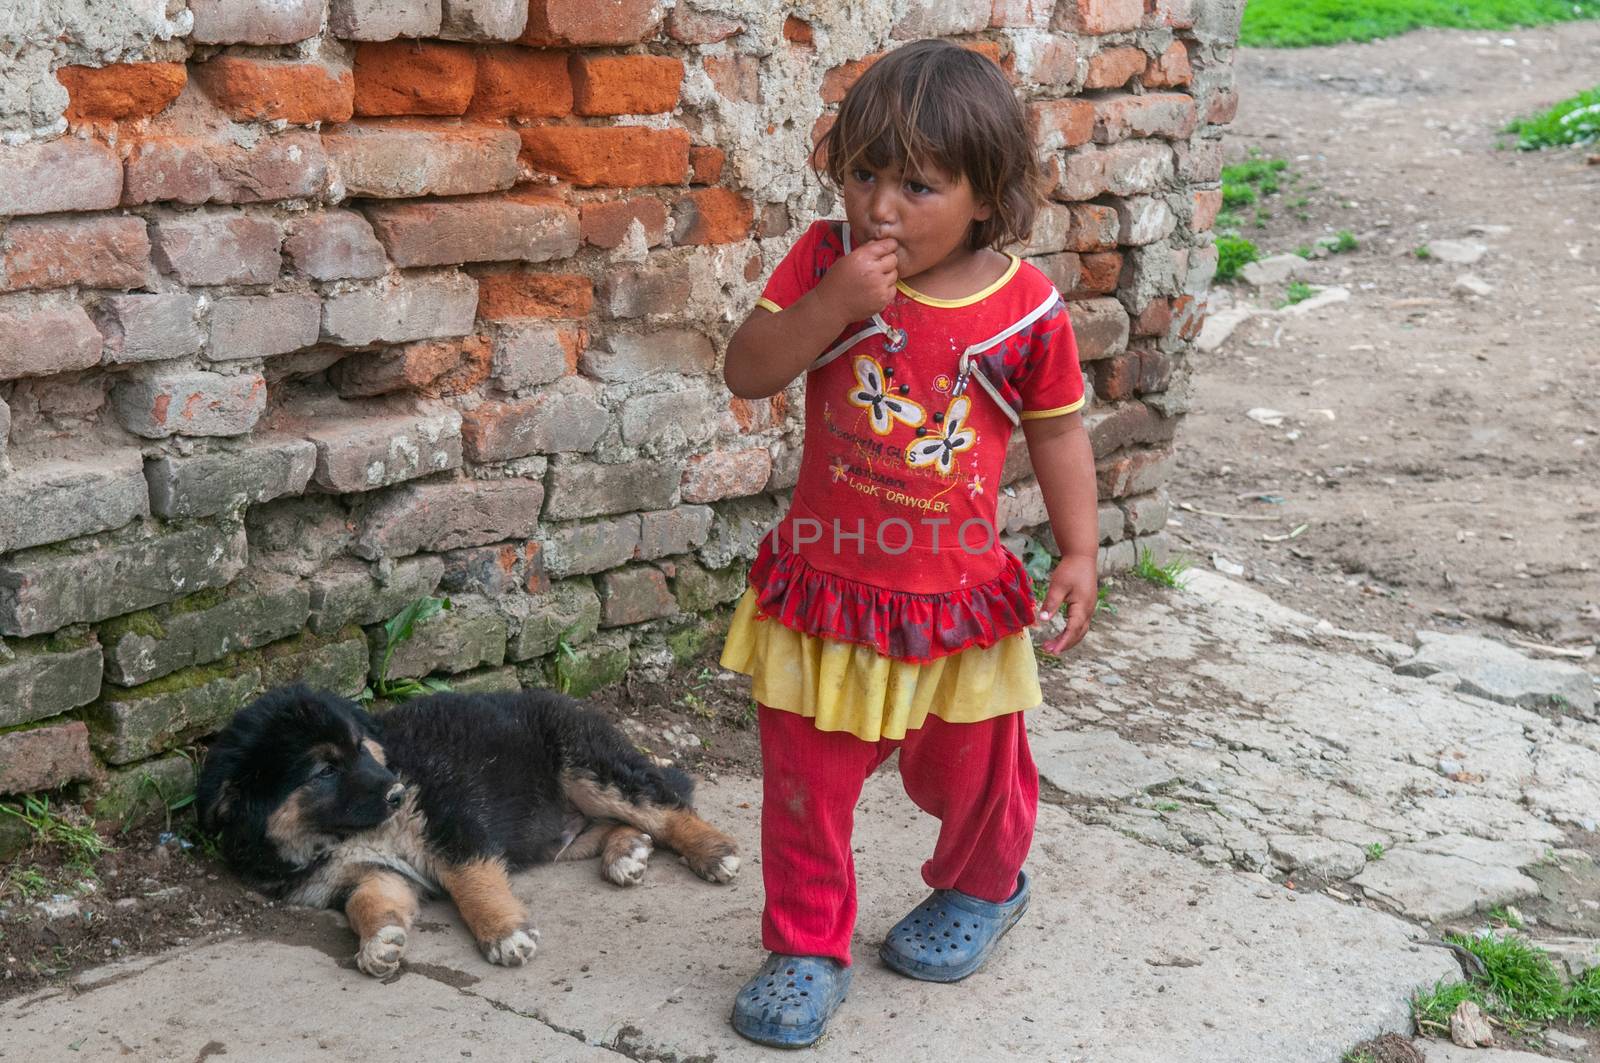 No opportunities for the Roma people in Slovakia. They struggle for dignity, without discrimination and poverty. by gonzalobell